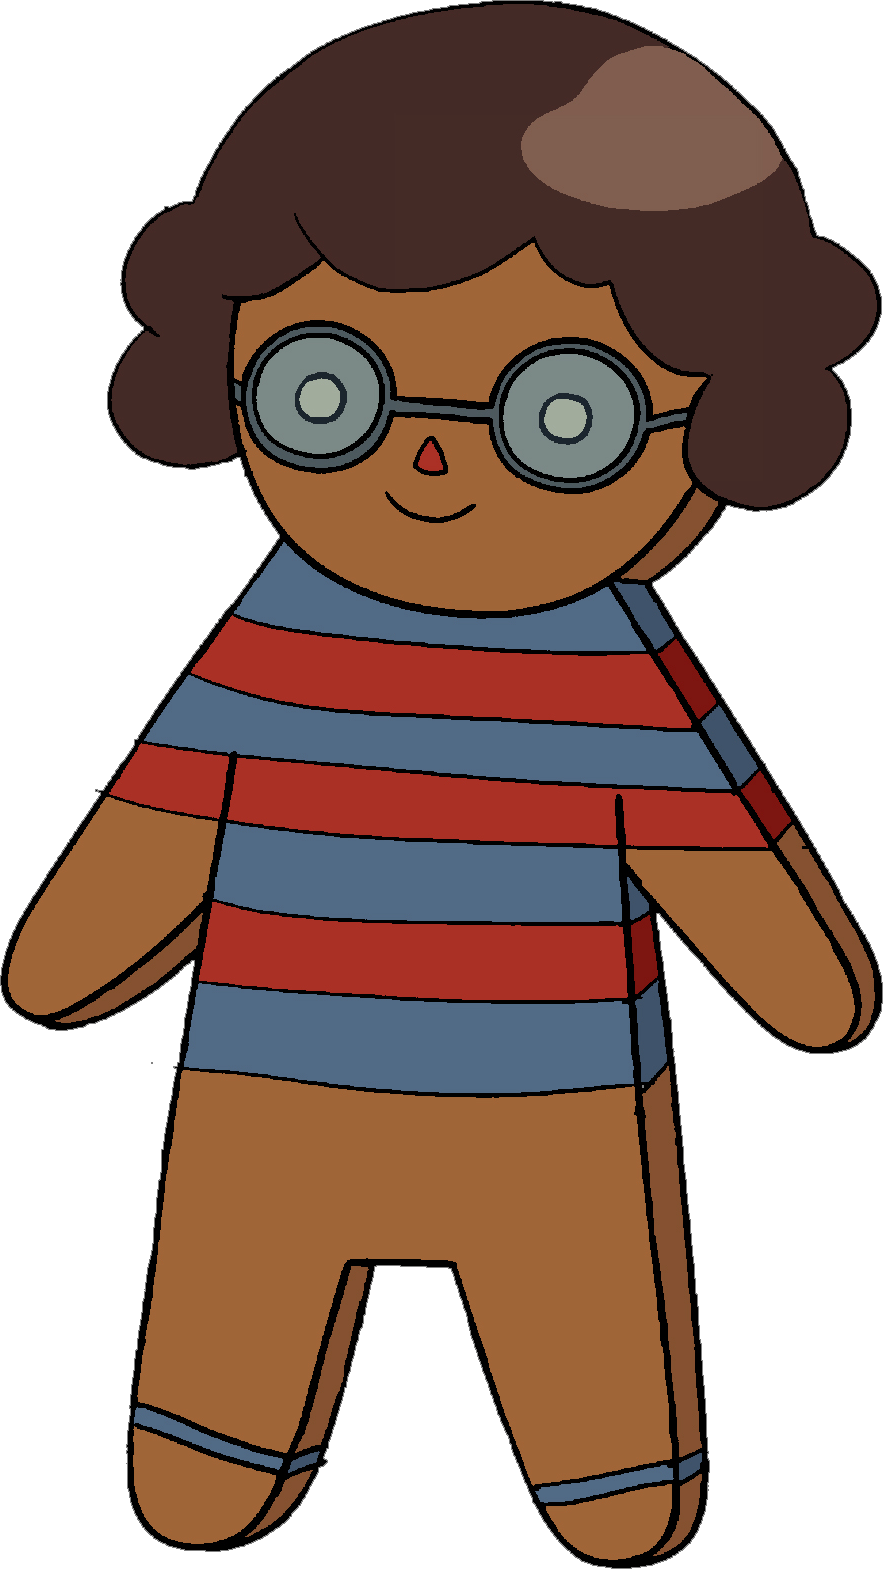 Rebecca adventure time wiki. Gingerbread clipart character